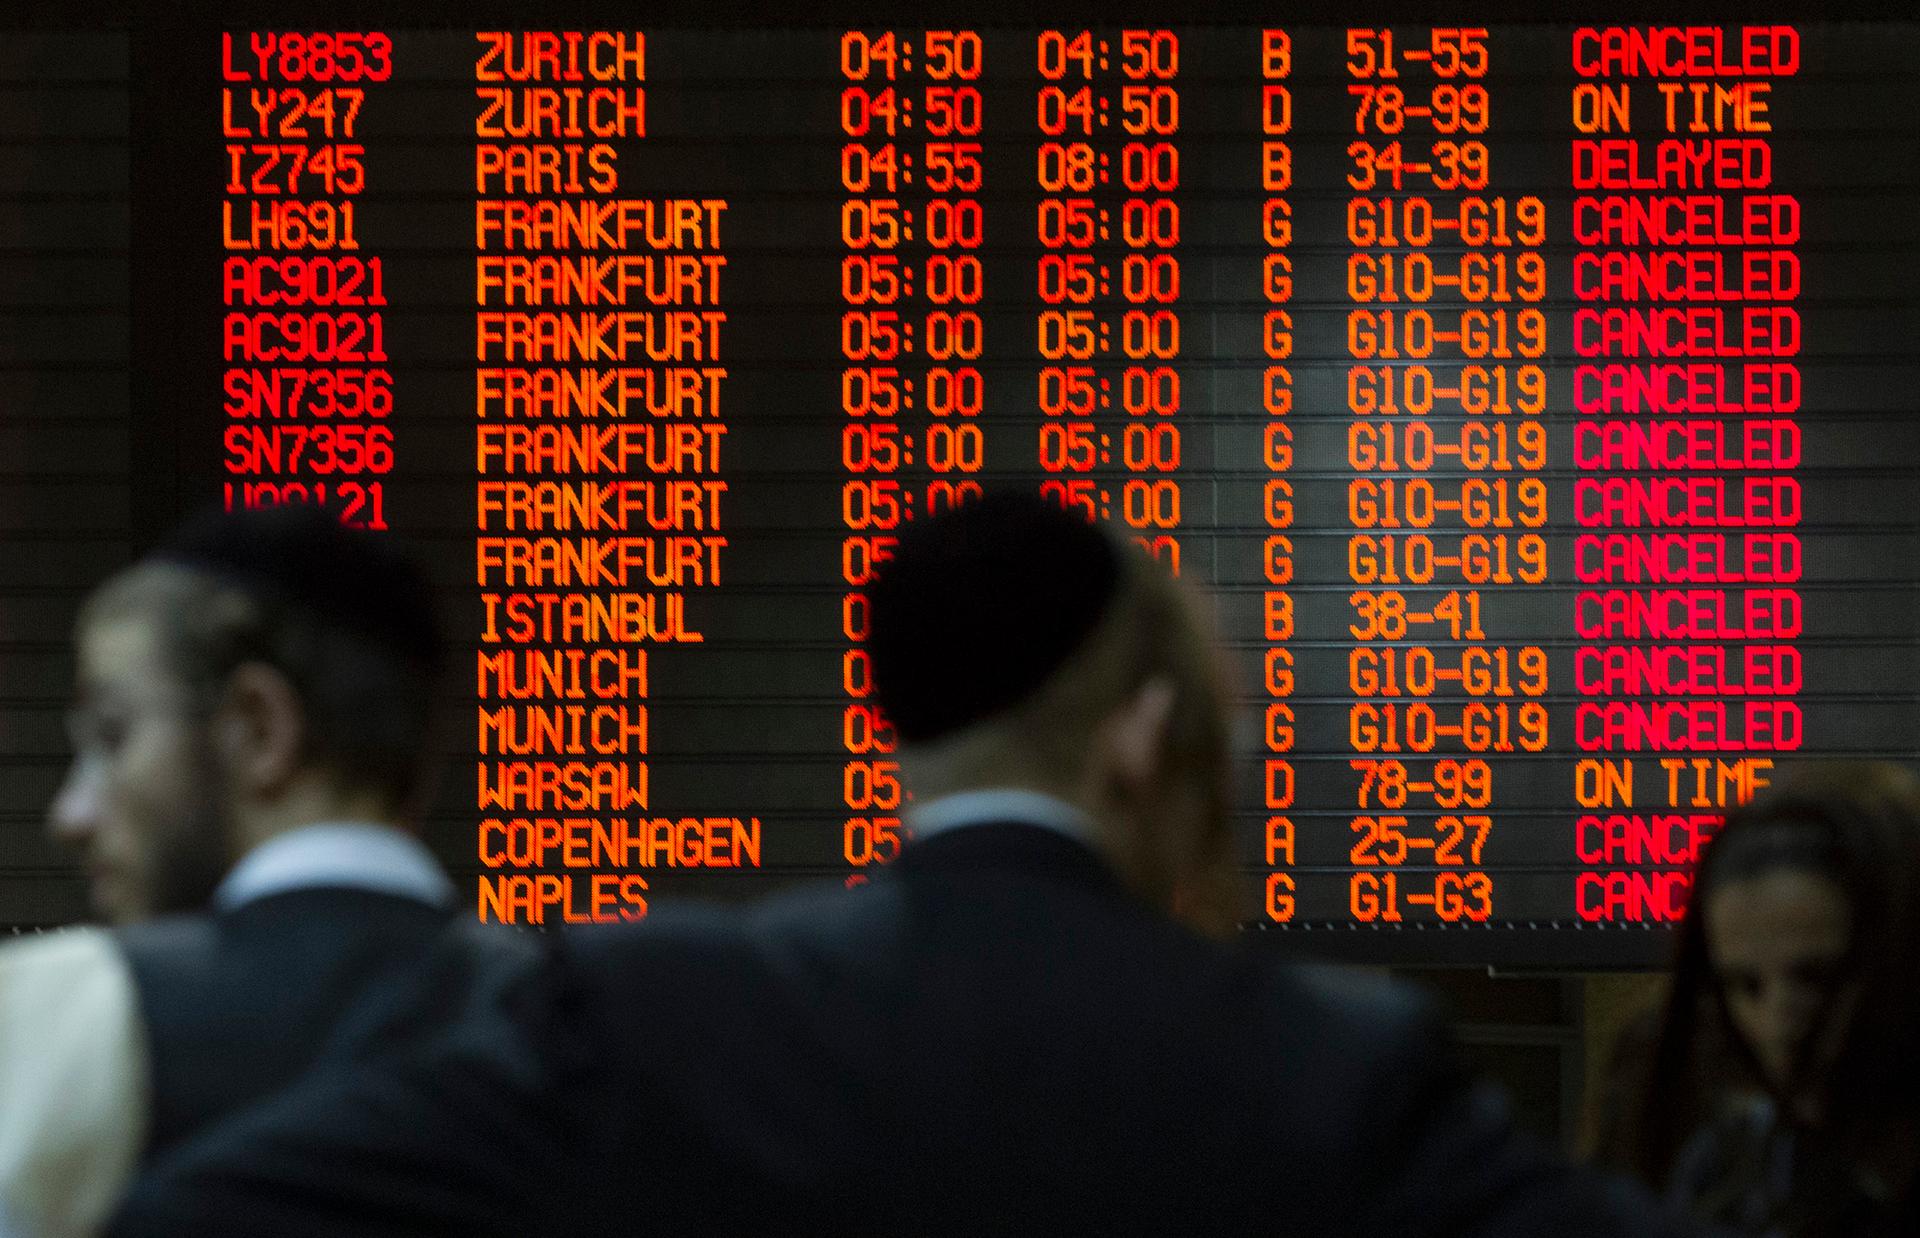 A departure board displays various cancellations at Ben Gurion International airport in Tel Aviv.